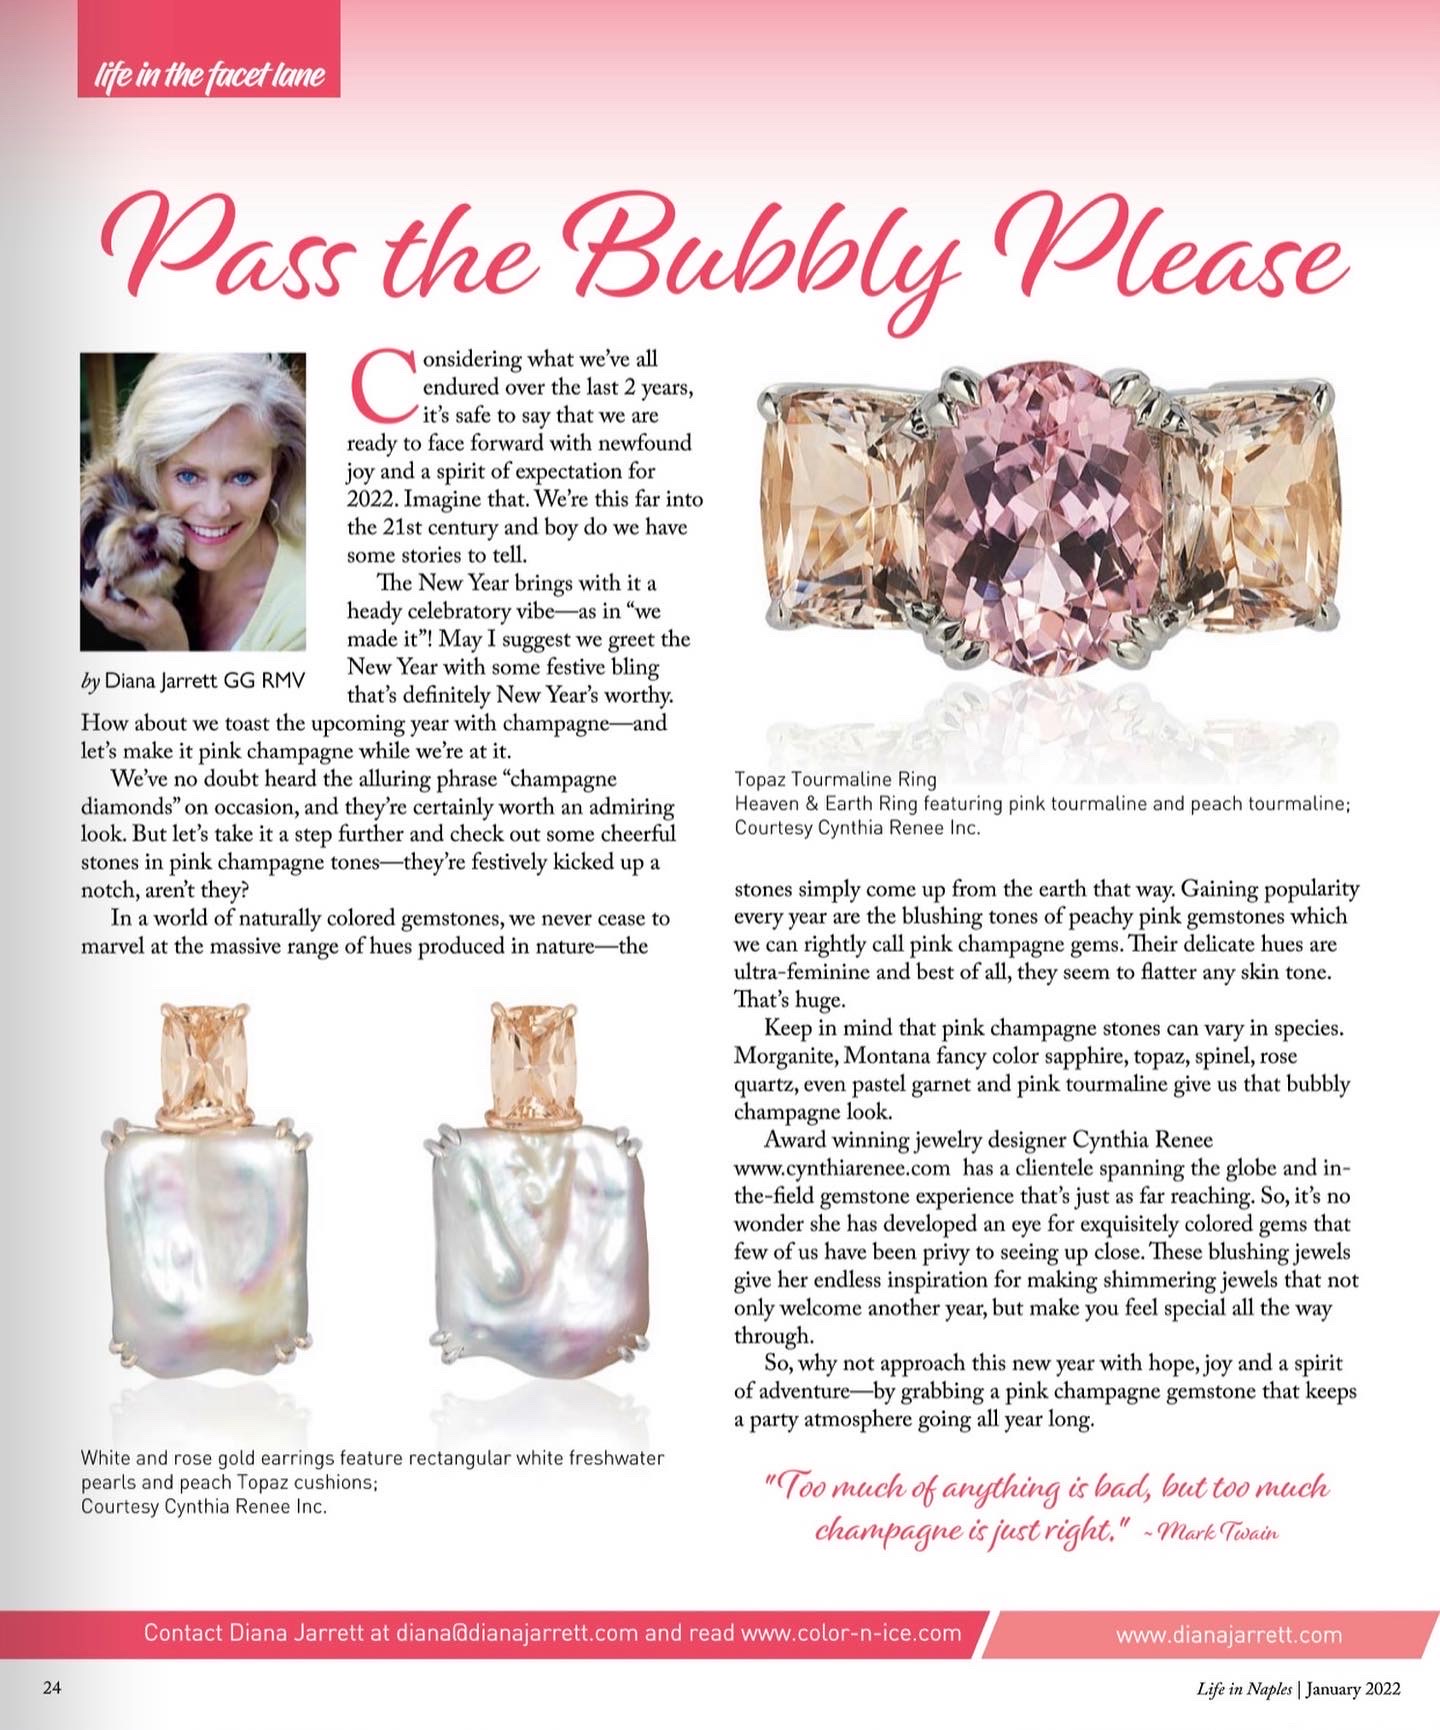 Diana Jarret raises a glass in praise of Cynthia Renee's exquisite champagne diamond, baroque pearl, and gorgeous blush pink-toned gems in her article for "Life in Naples".